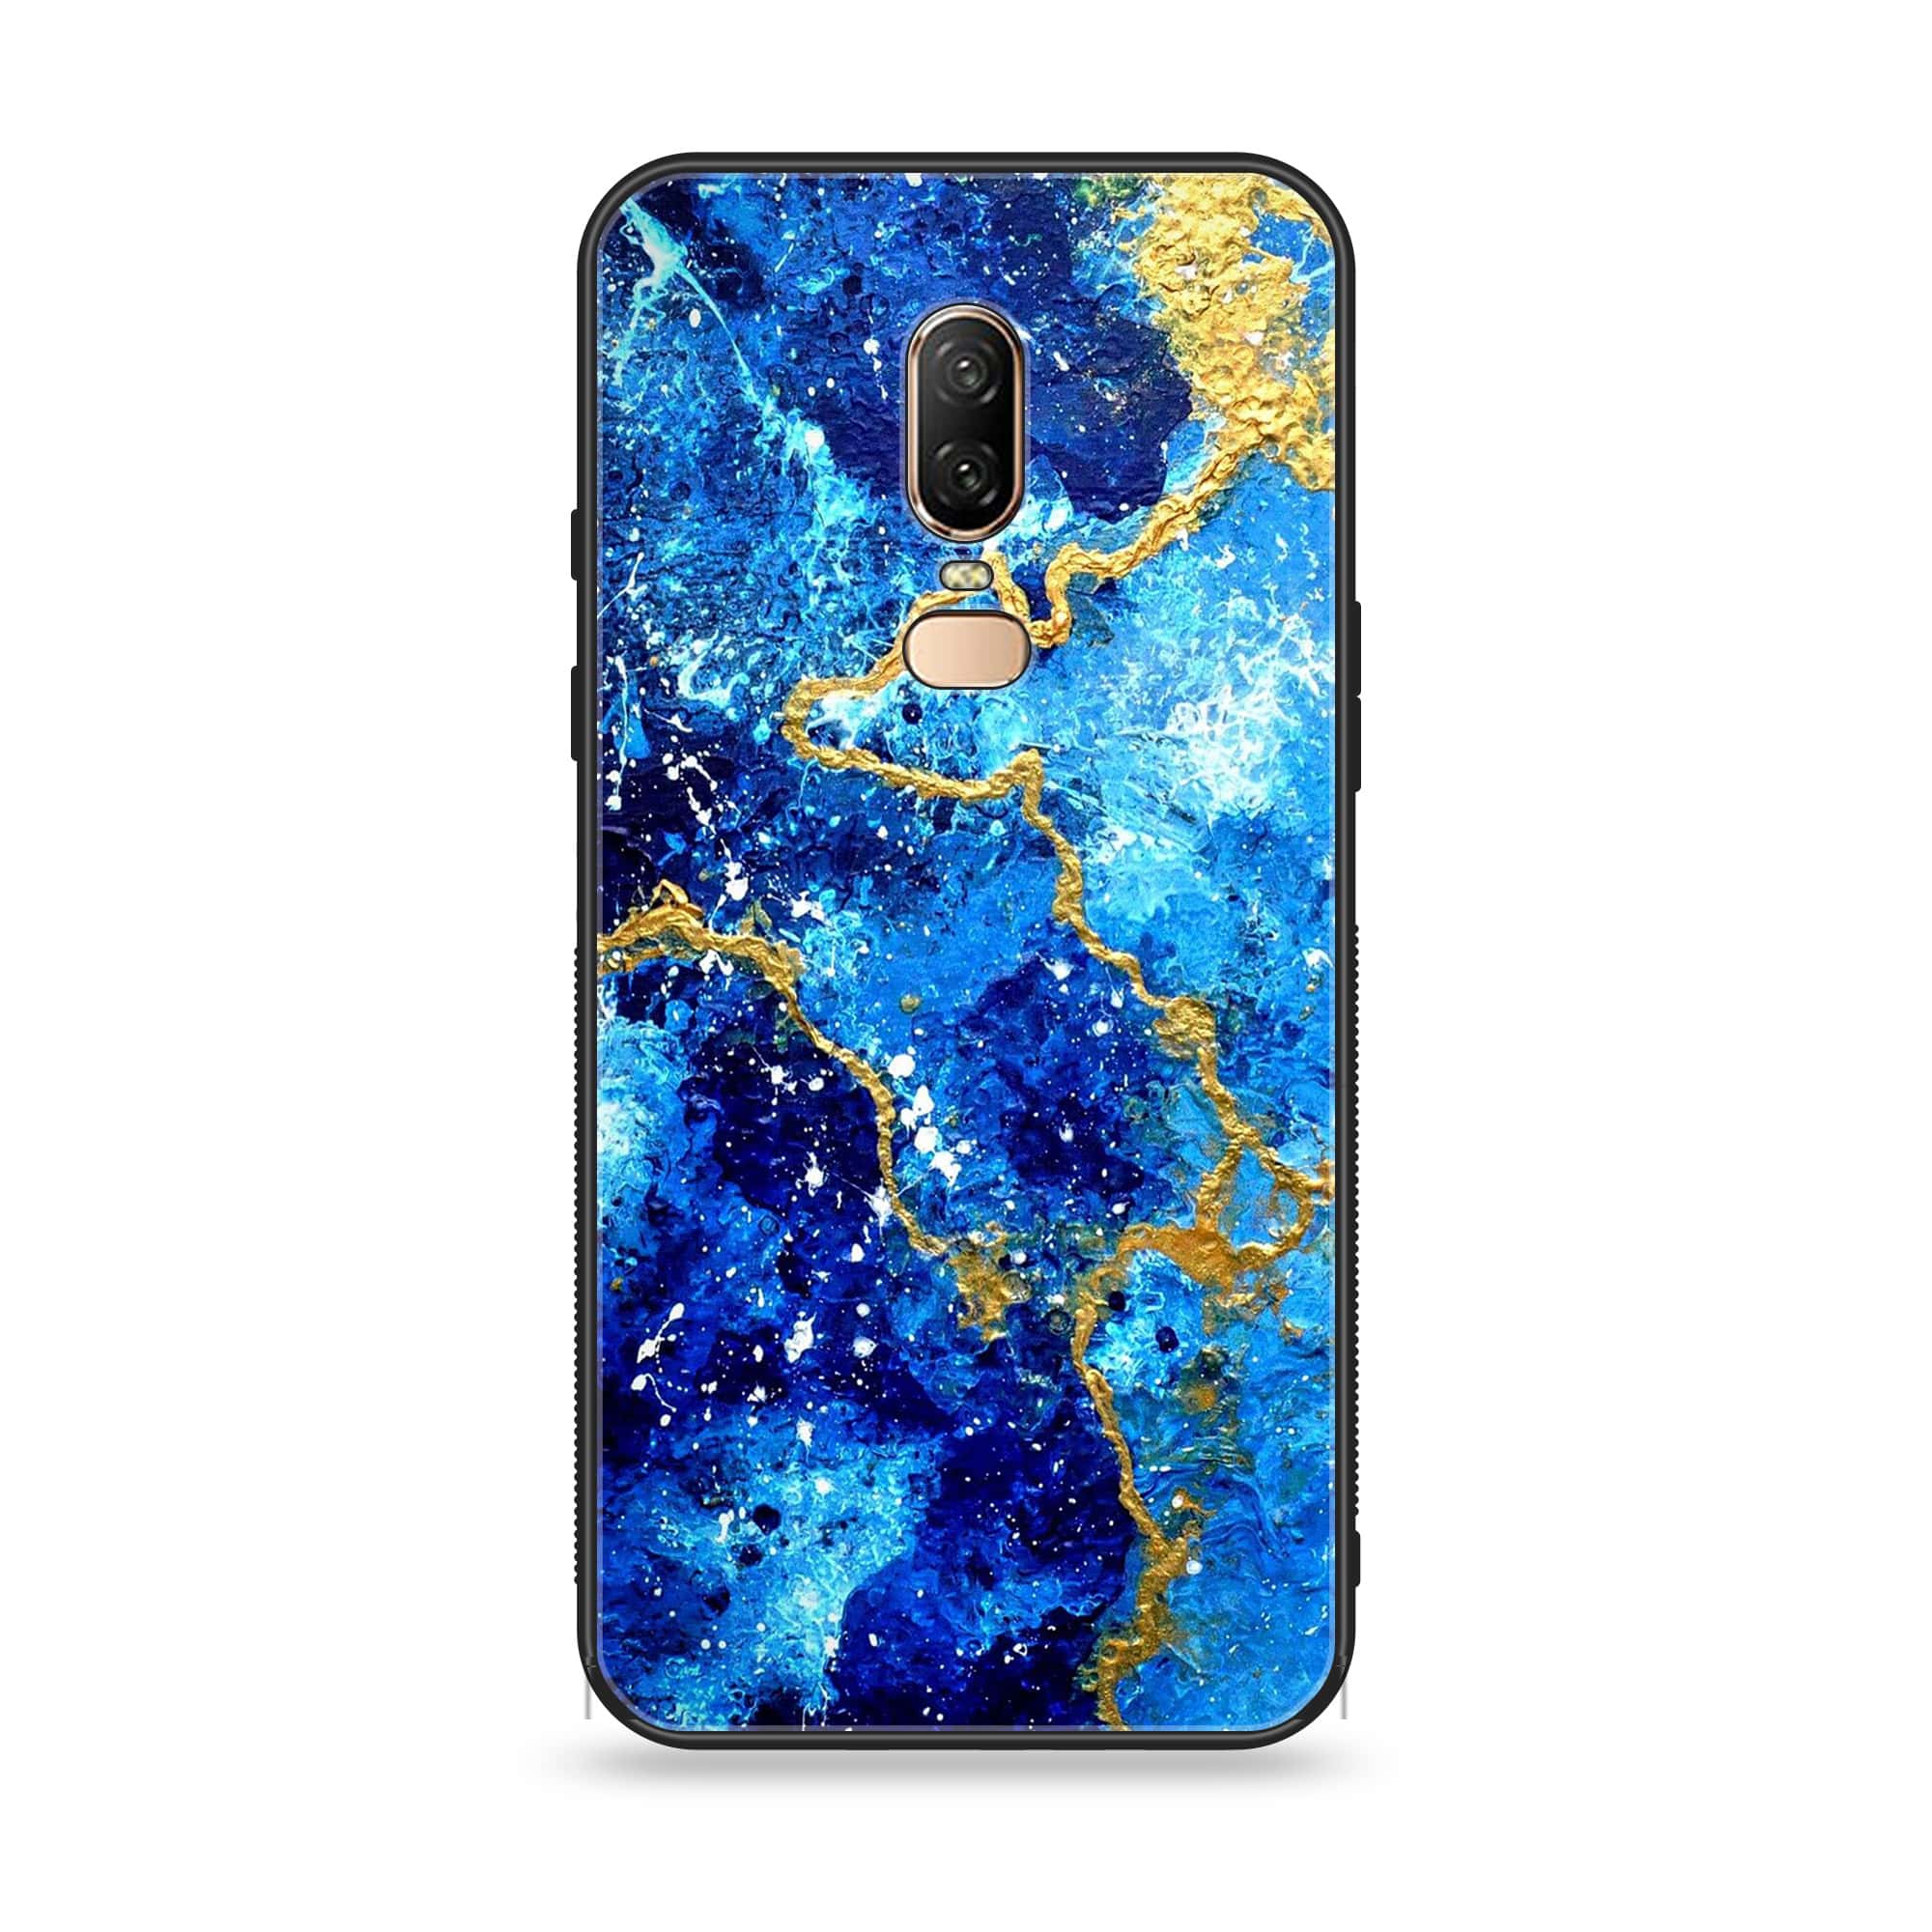 OnePlus 6 - Blue Marble Series V 2.0 - Premium Printed Glass soft Bumper shock Proof Case